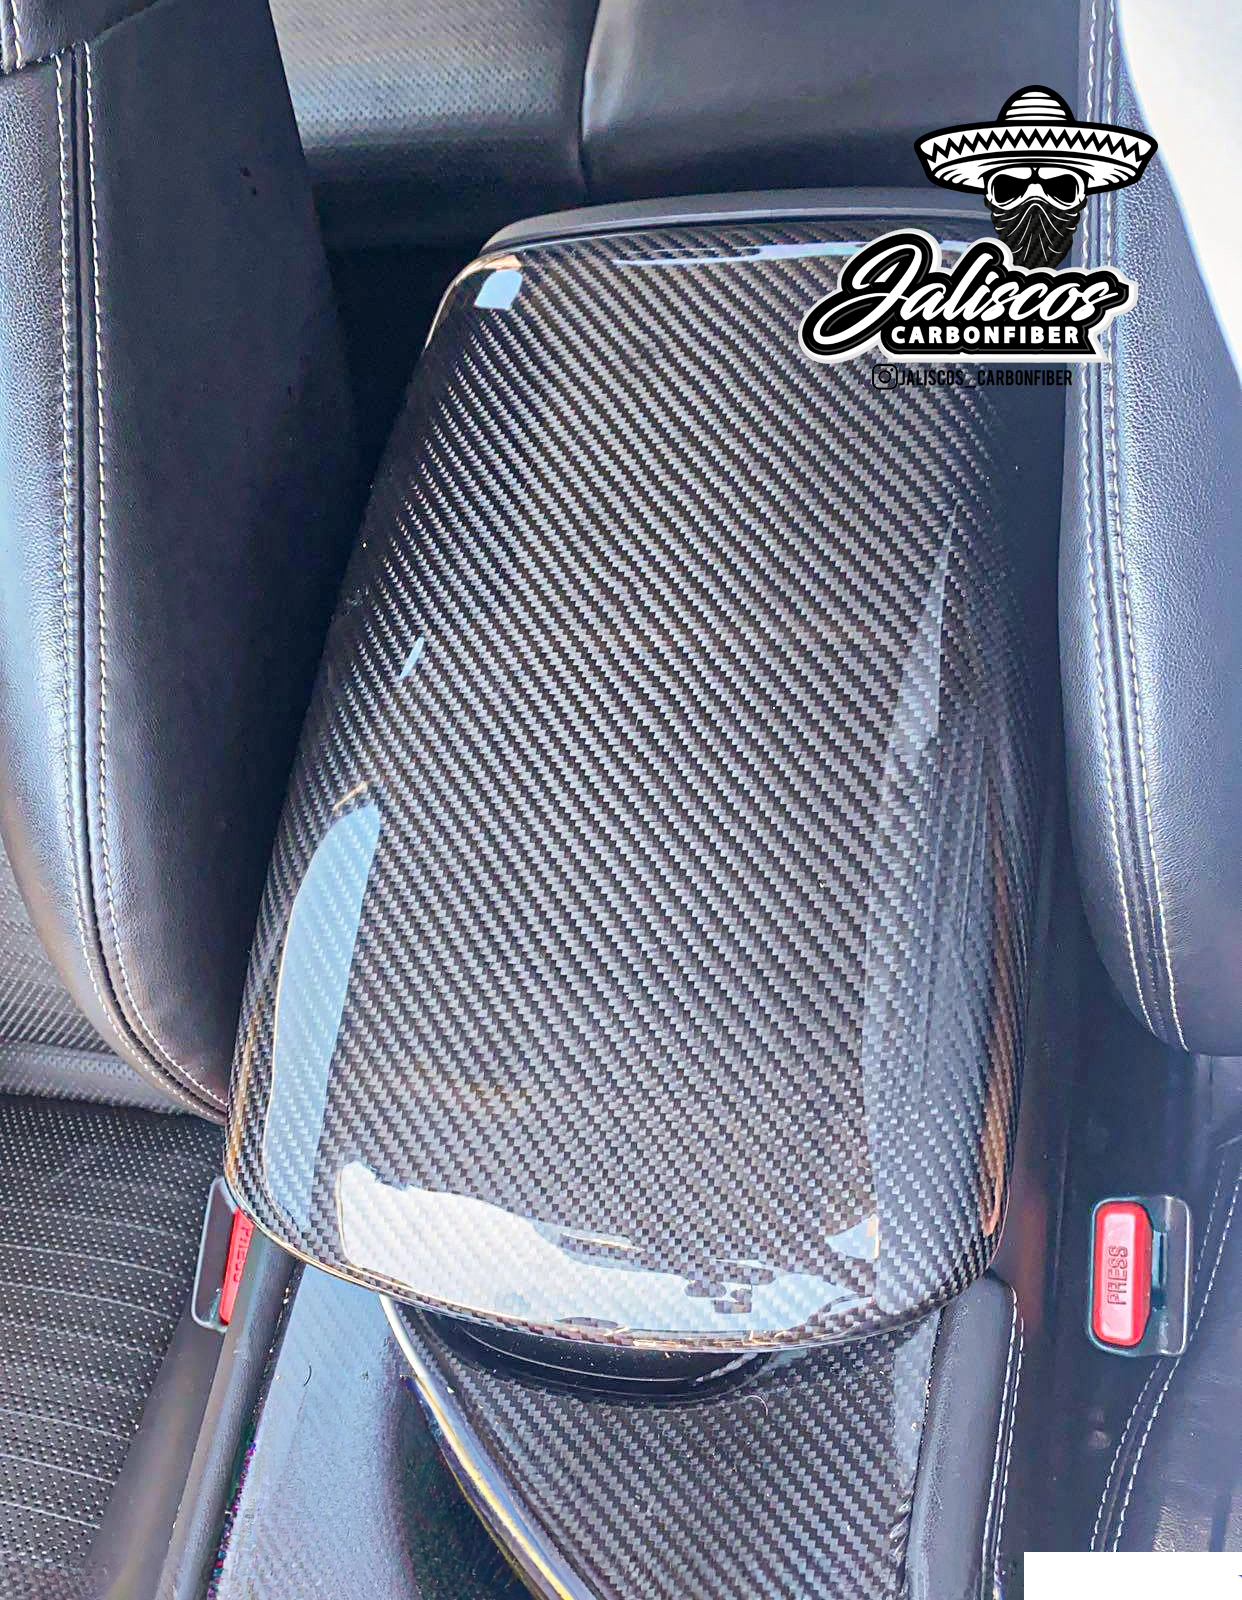 Jalisco's CF Carbon Fiber Arm Rest, a full replacement for OEM showing the sleek design in an Infiniti Q50/Q60 interior.